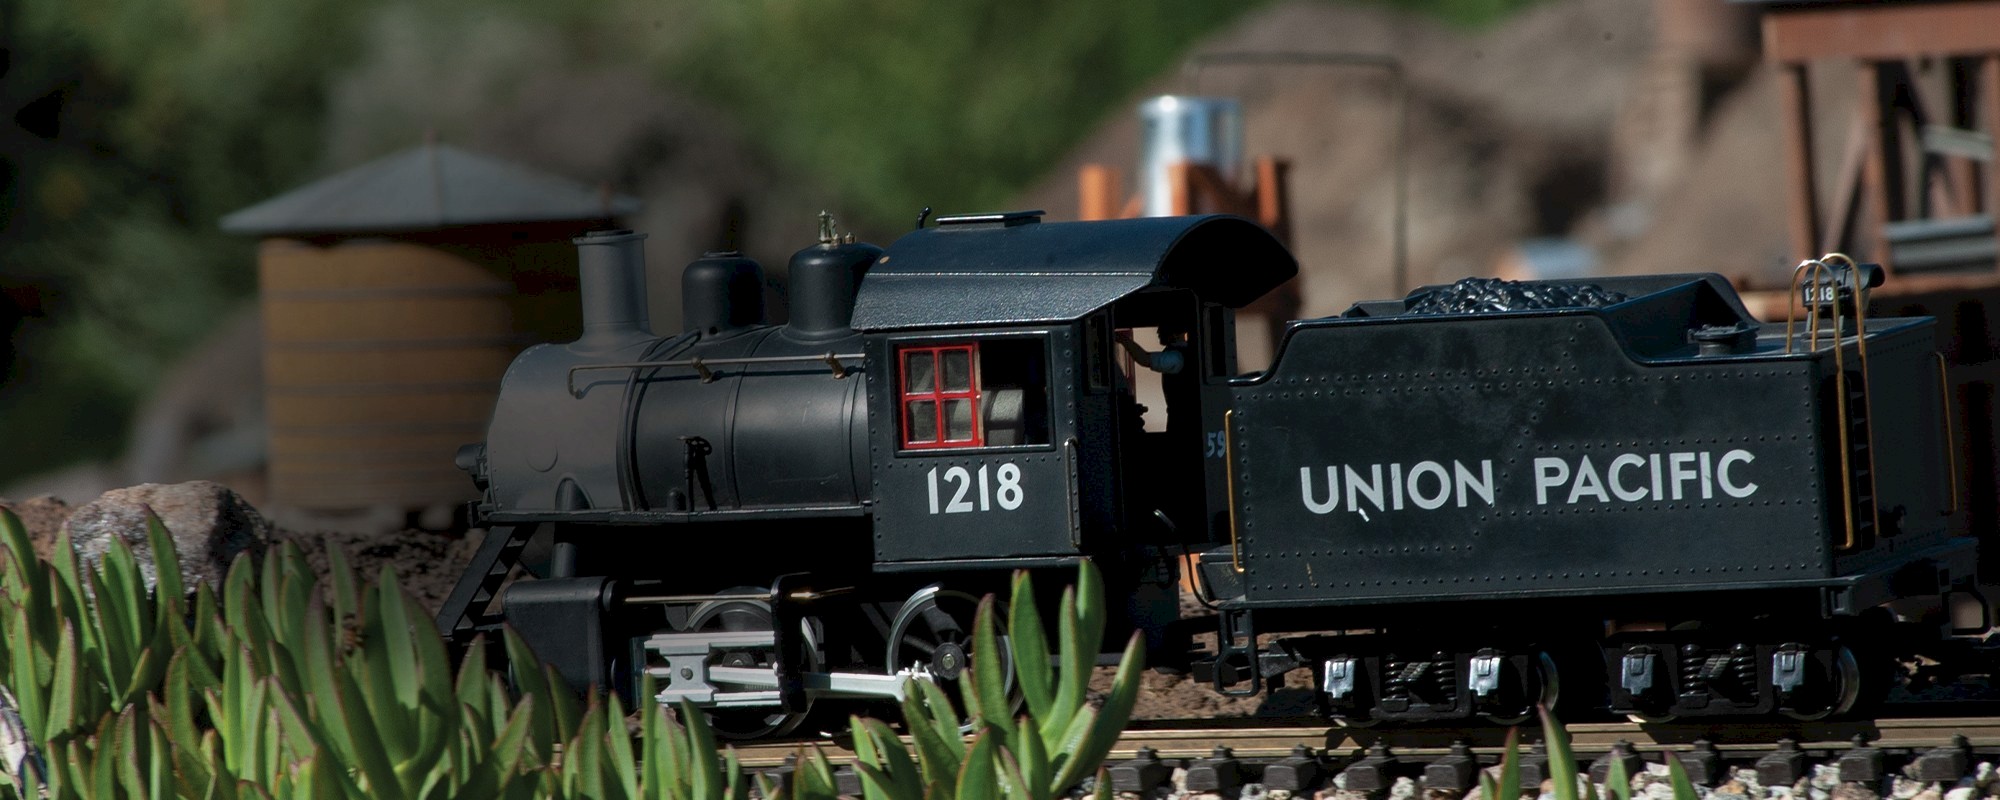 trains header at The Living Desert Zoo and Gardens